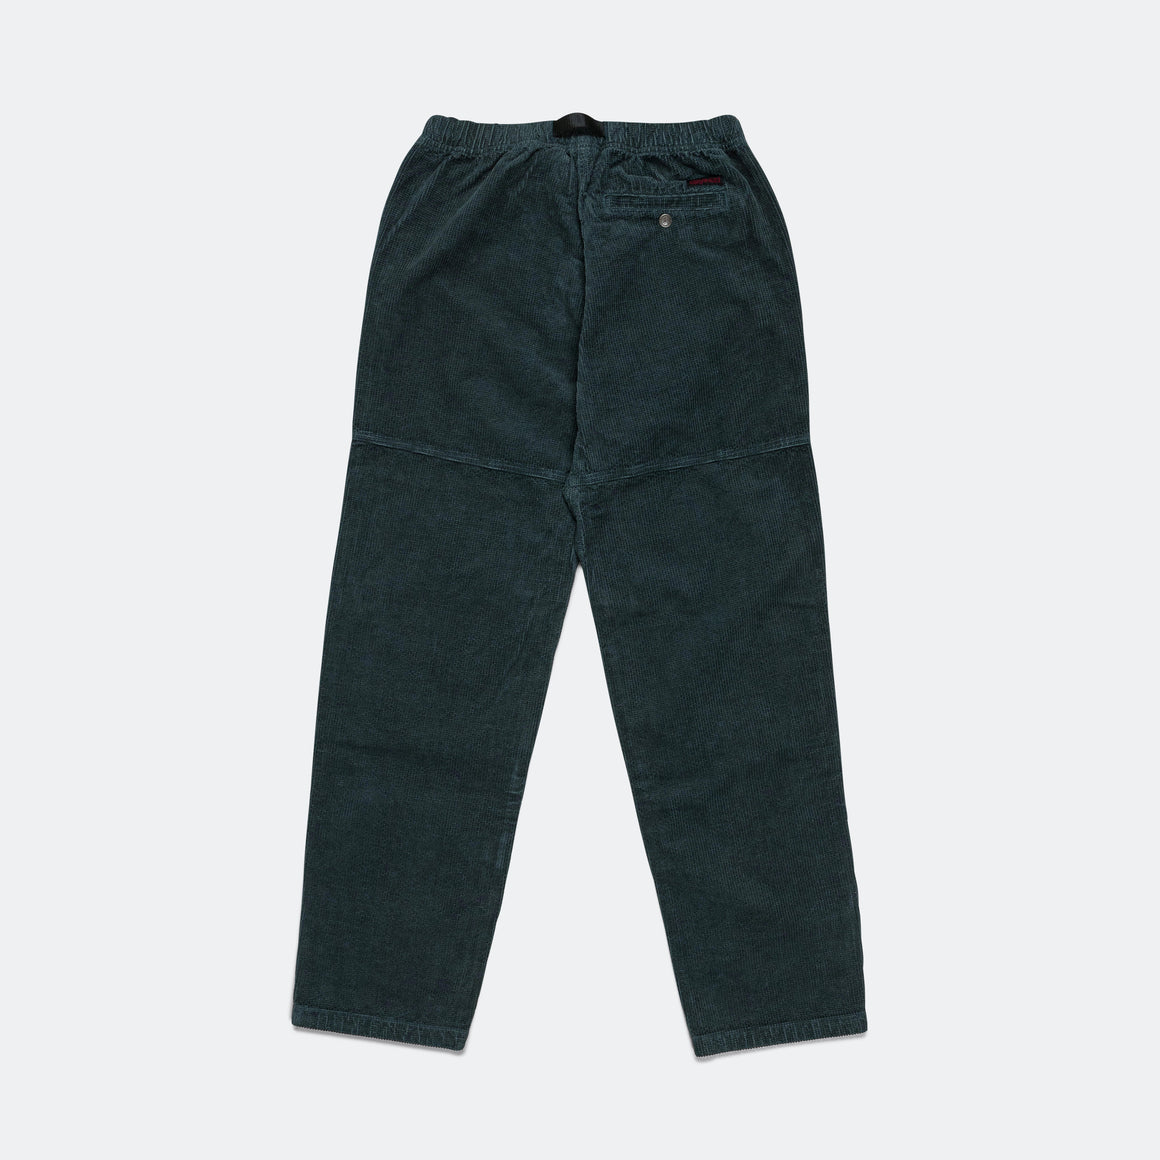 Gramicci - Waffle Cord Double-Knee Climber Pant - Foggy Pine Dye - UP THERE